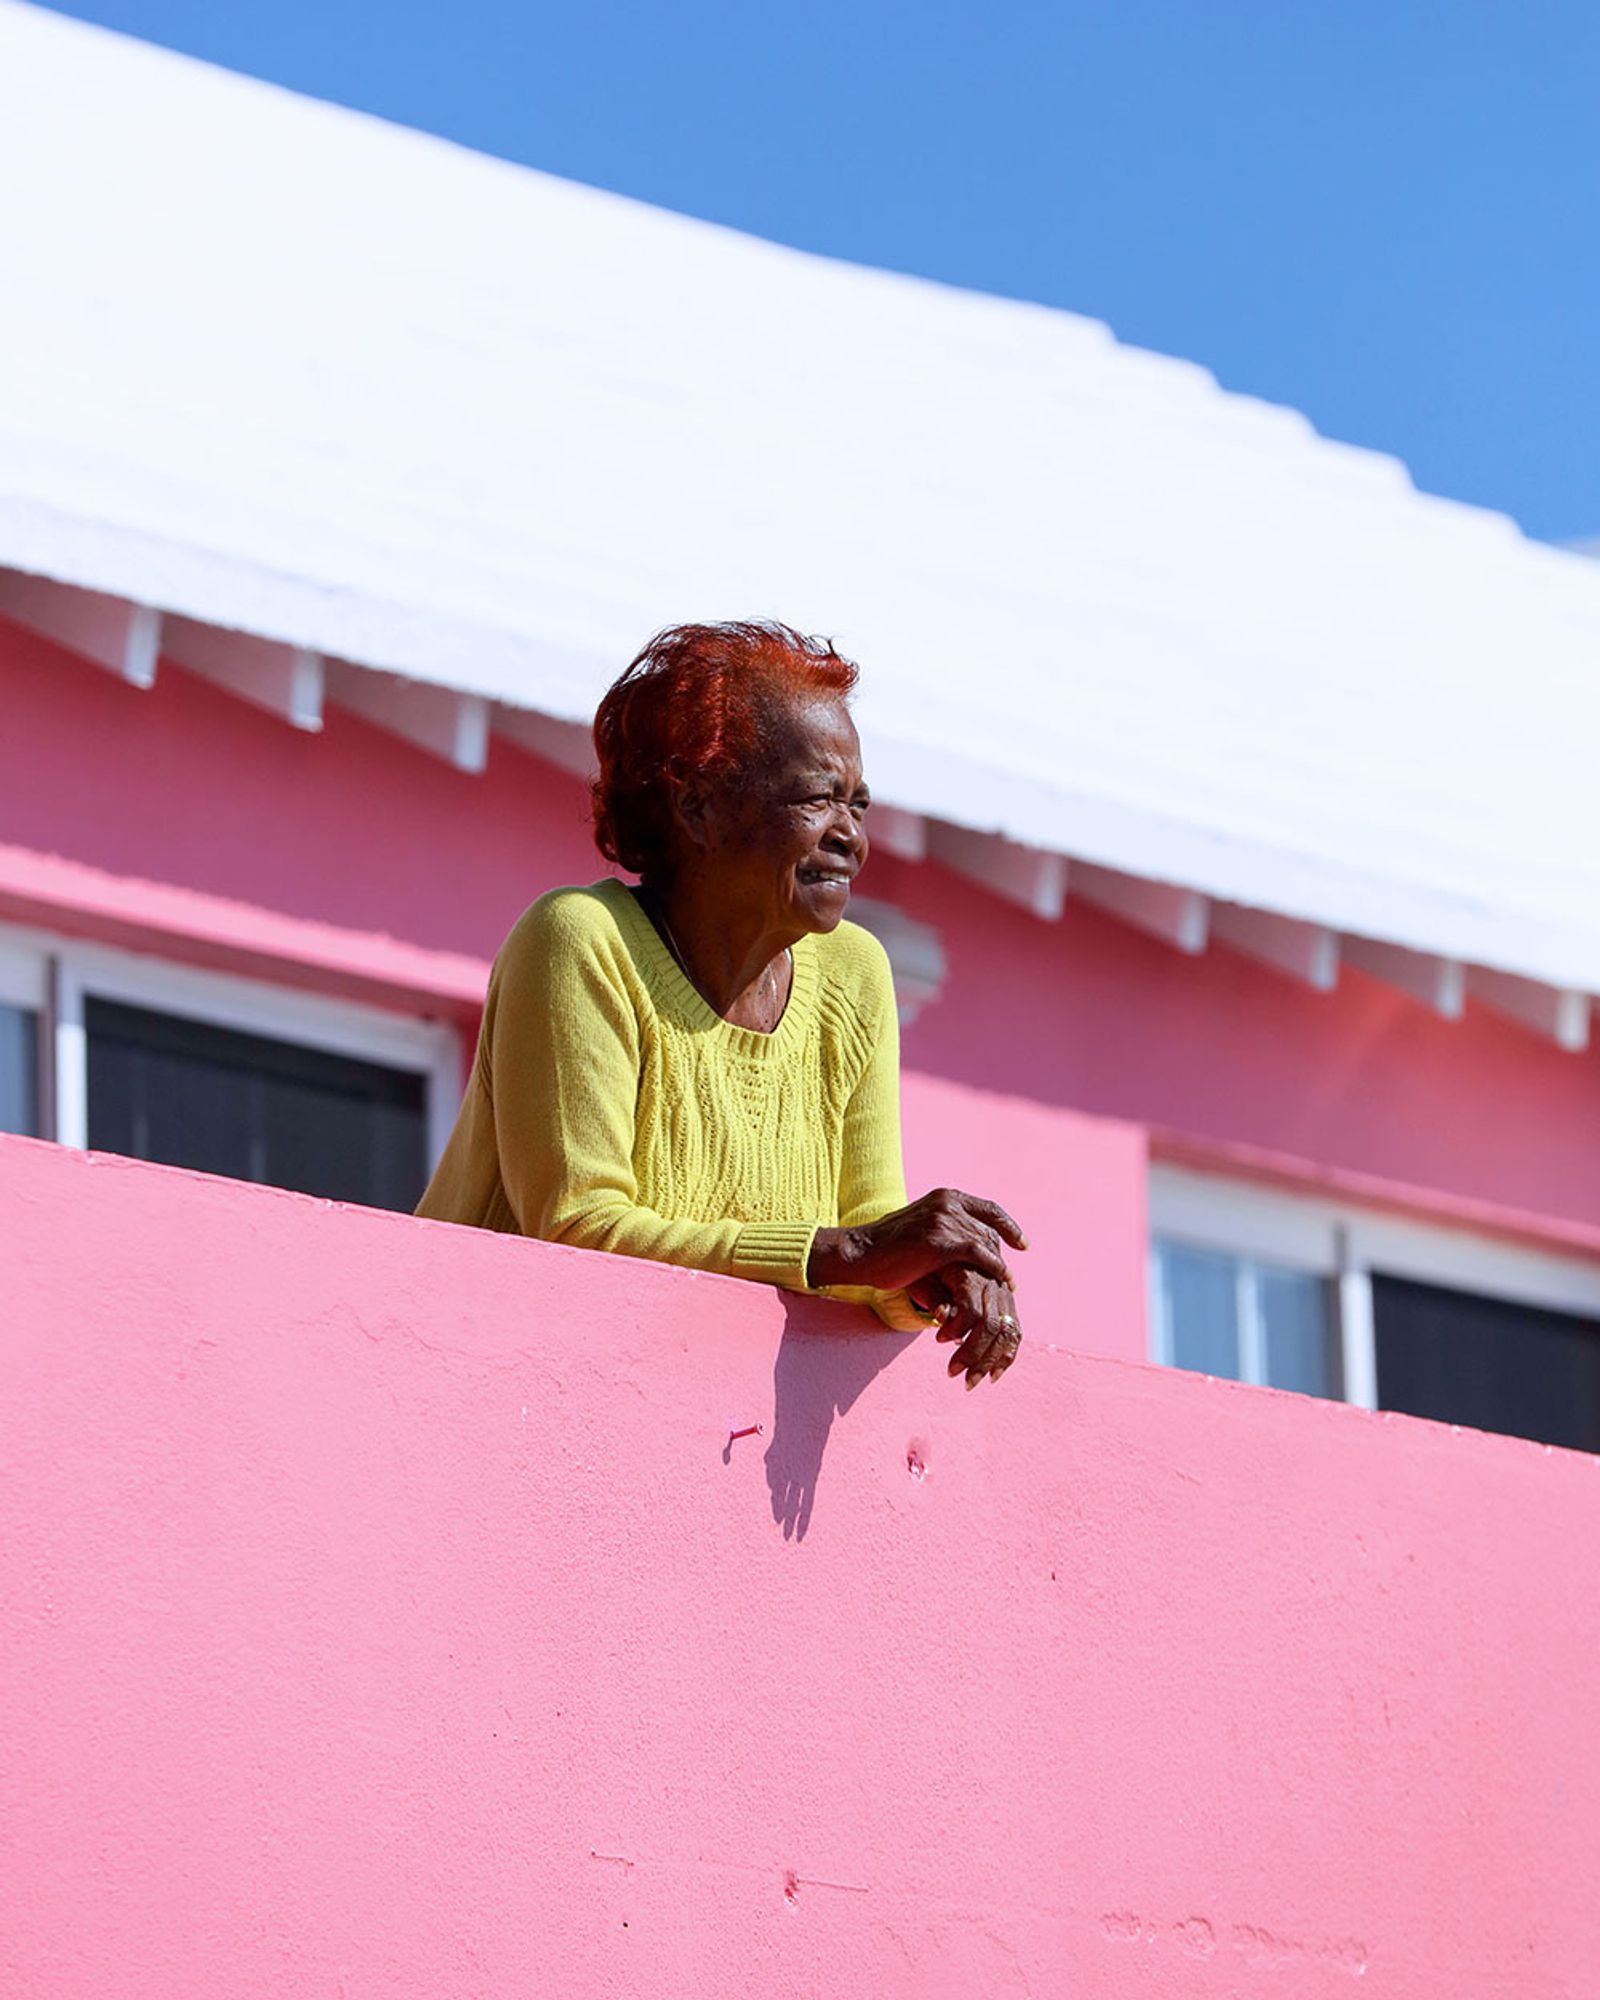 © Meredith Andrews - Image from the Faces of Bermuda photography project